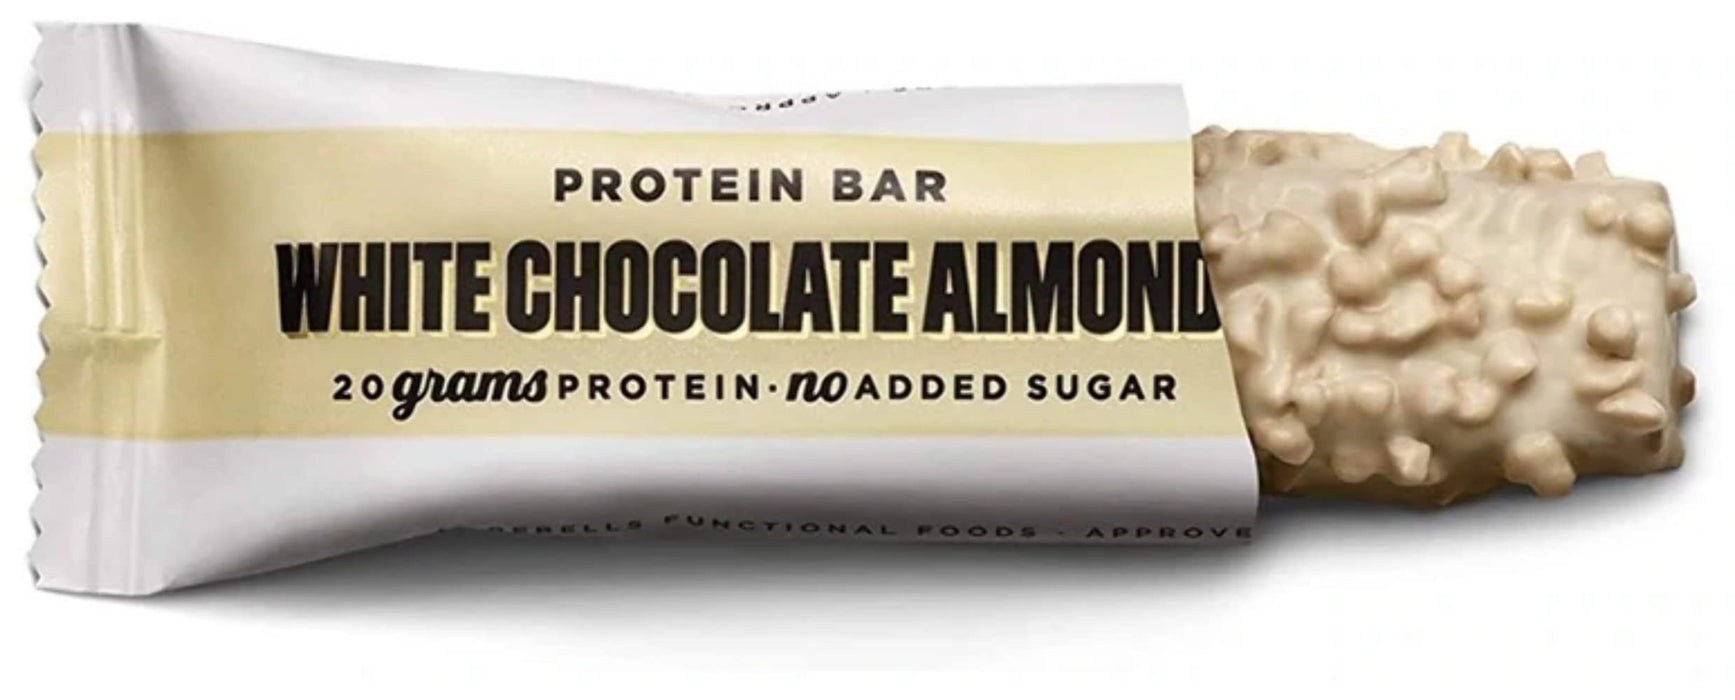 White Chocolate and Almond Protein Bar 55g 